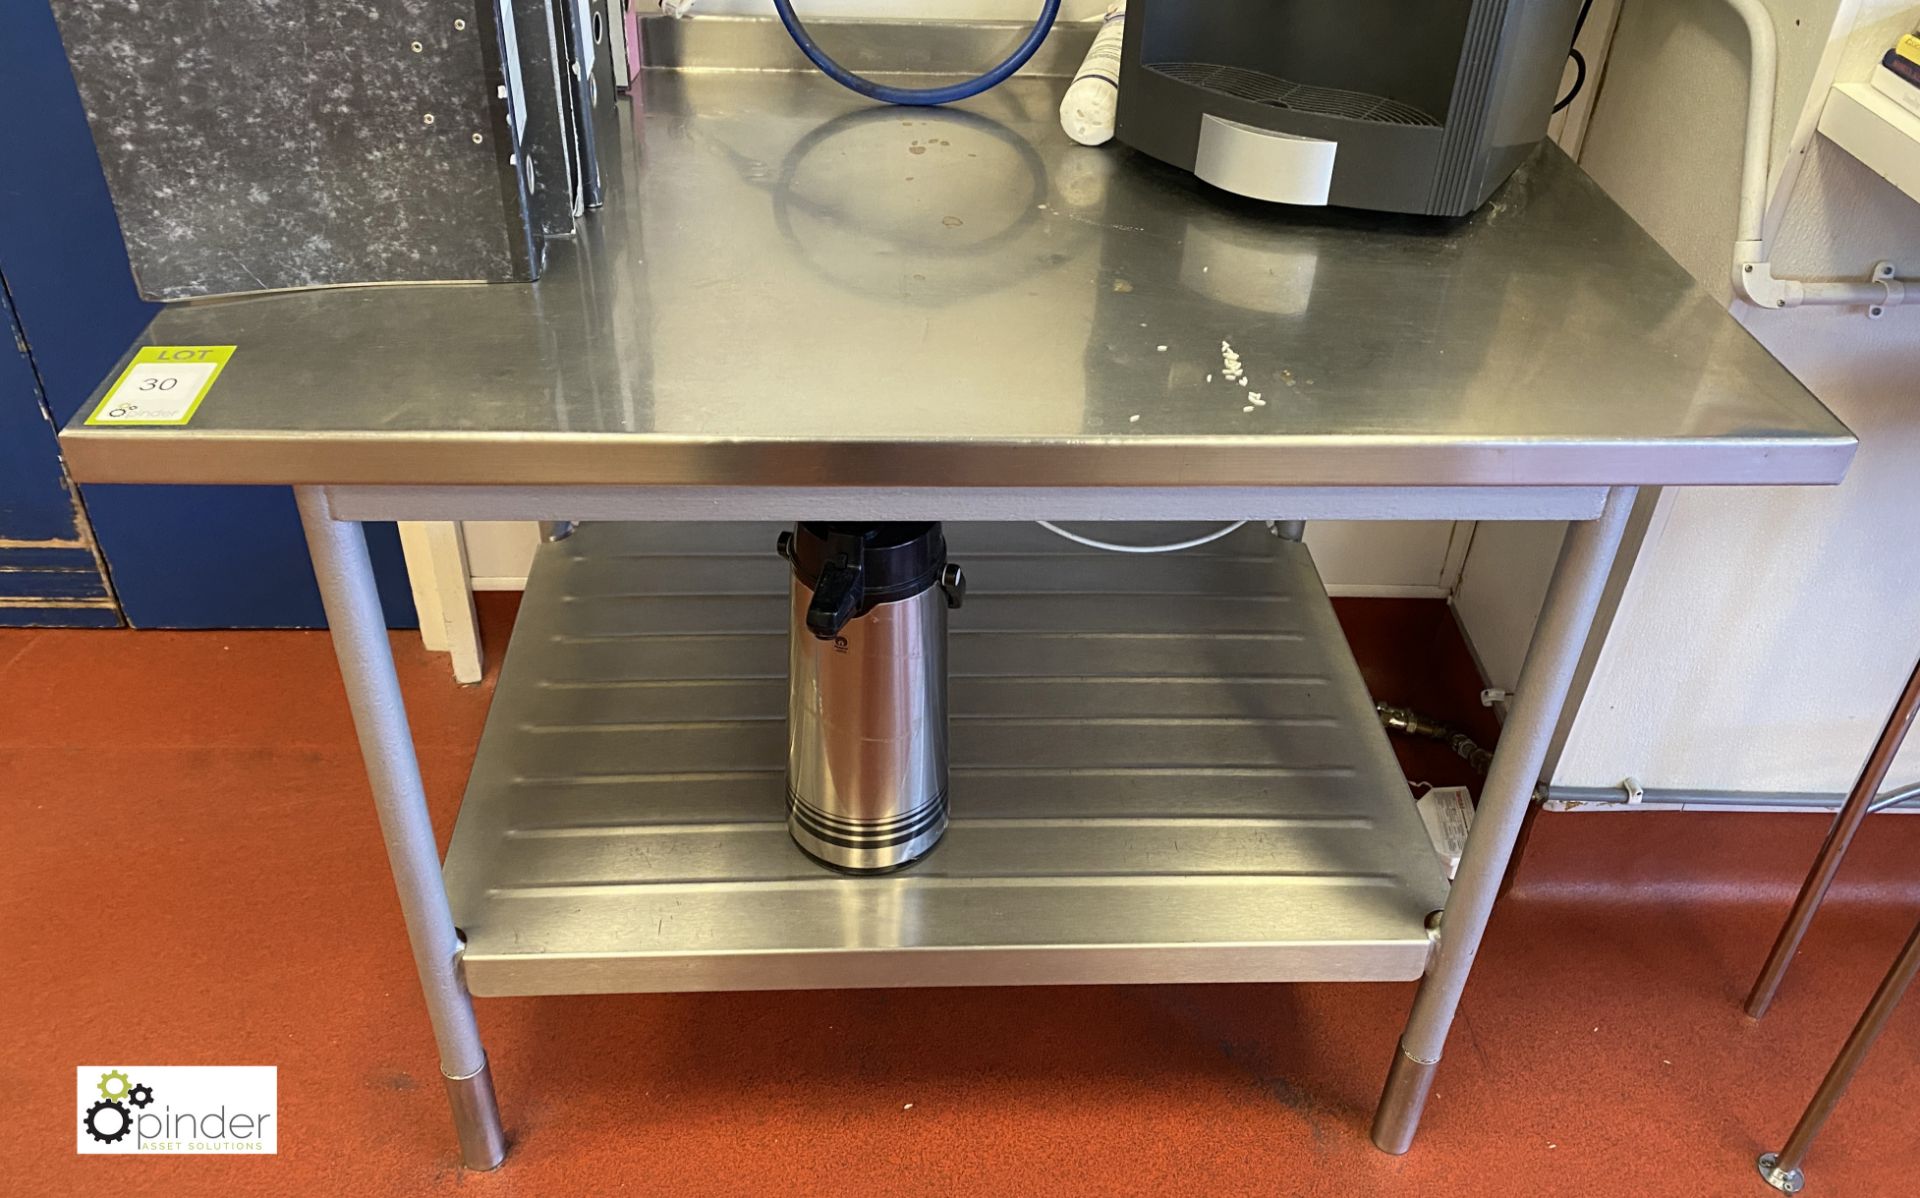 Stainless steel Preparation Table, 1220mm x 770mm x 870mm, with rear lip and undershelf (lot - Image 2 of 3